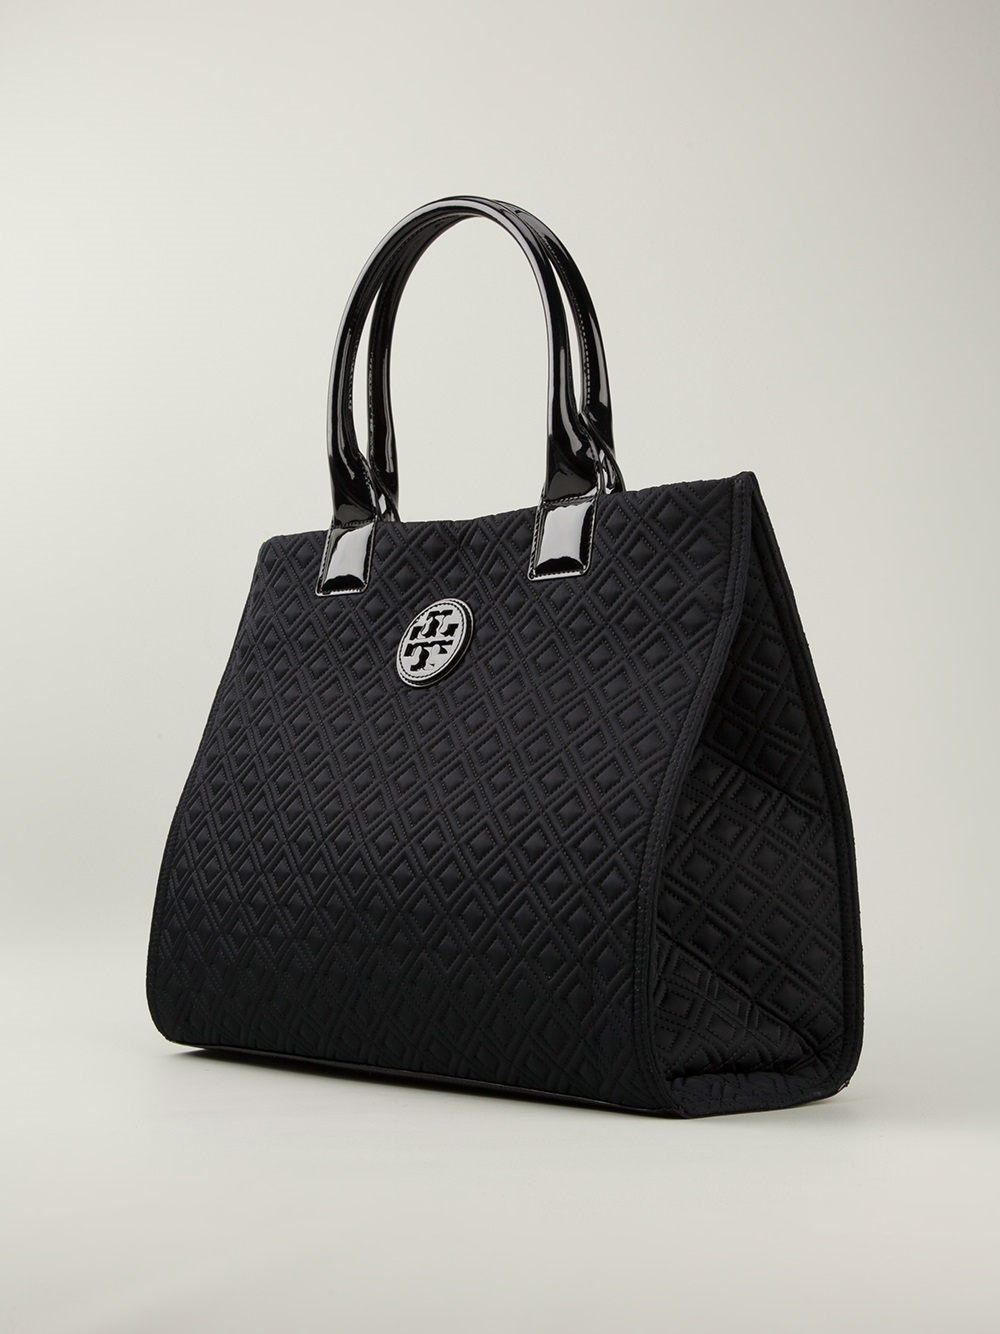 Tory Burch Ella Quilted Tote in Black - Lyst